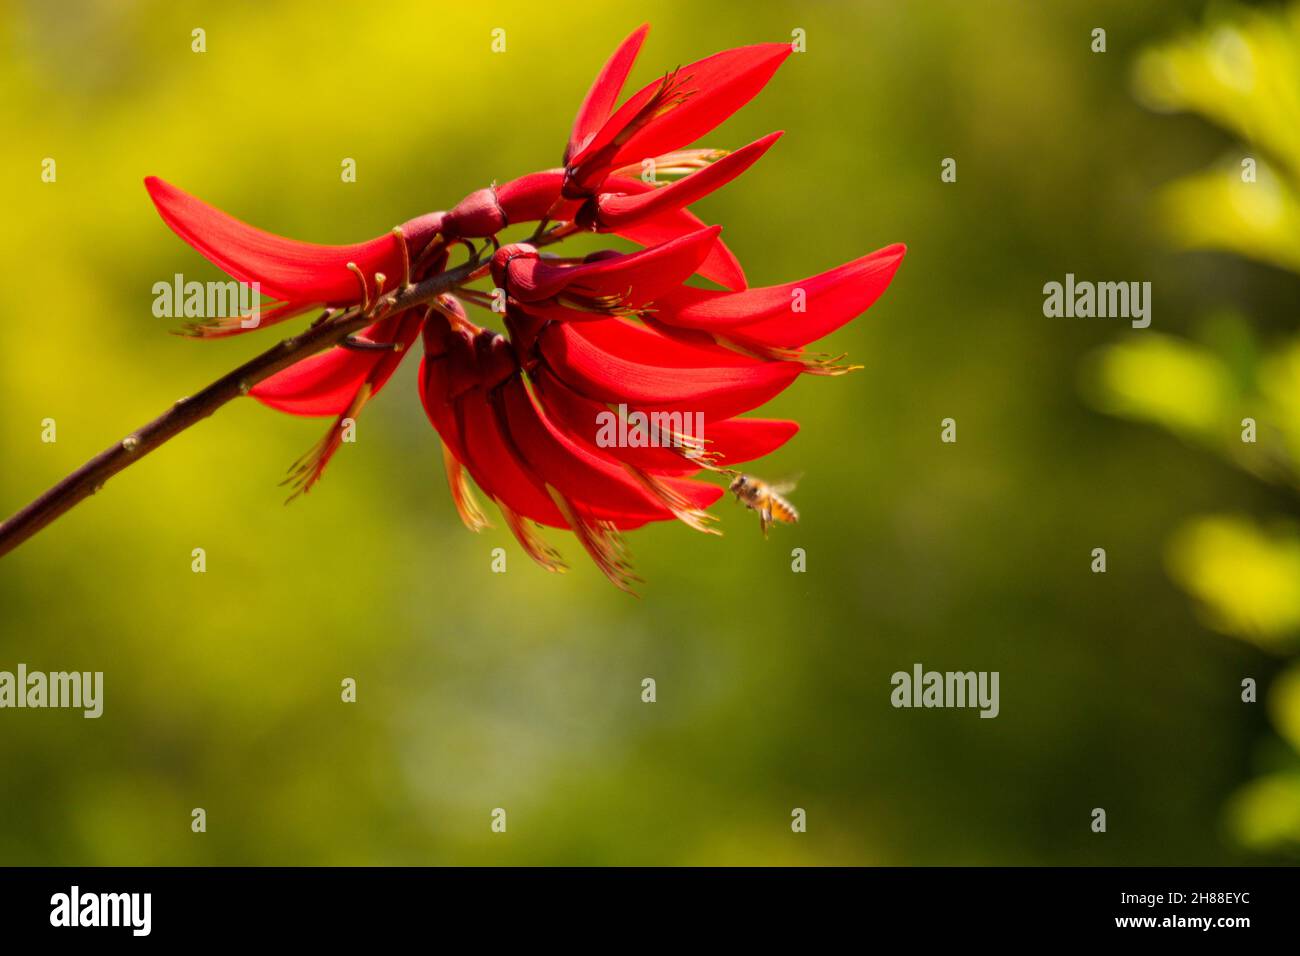 Indian coral tree flowering in summer Stock Photo